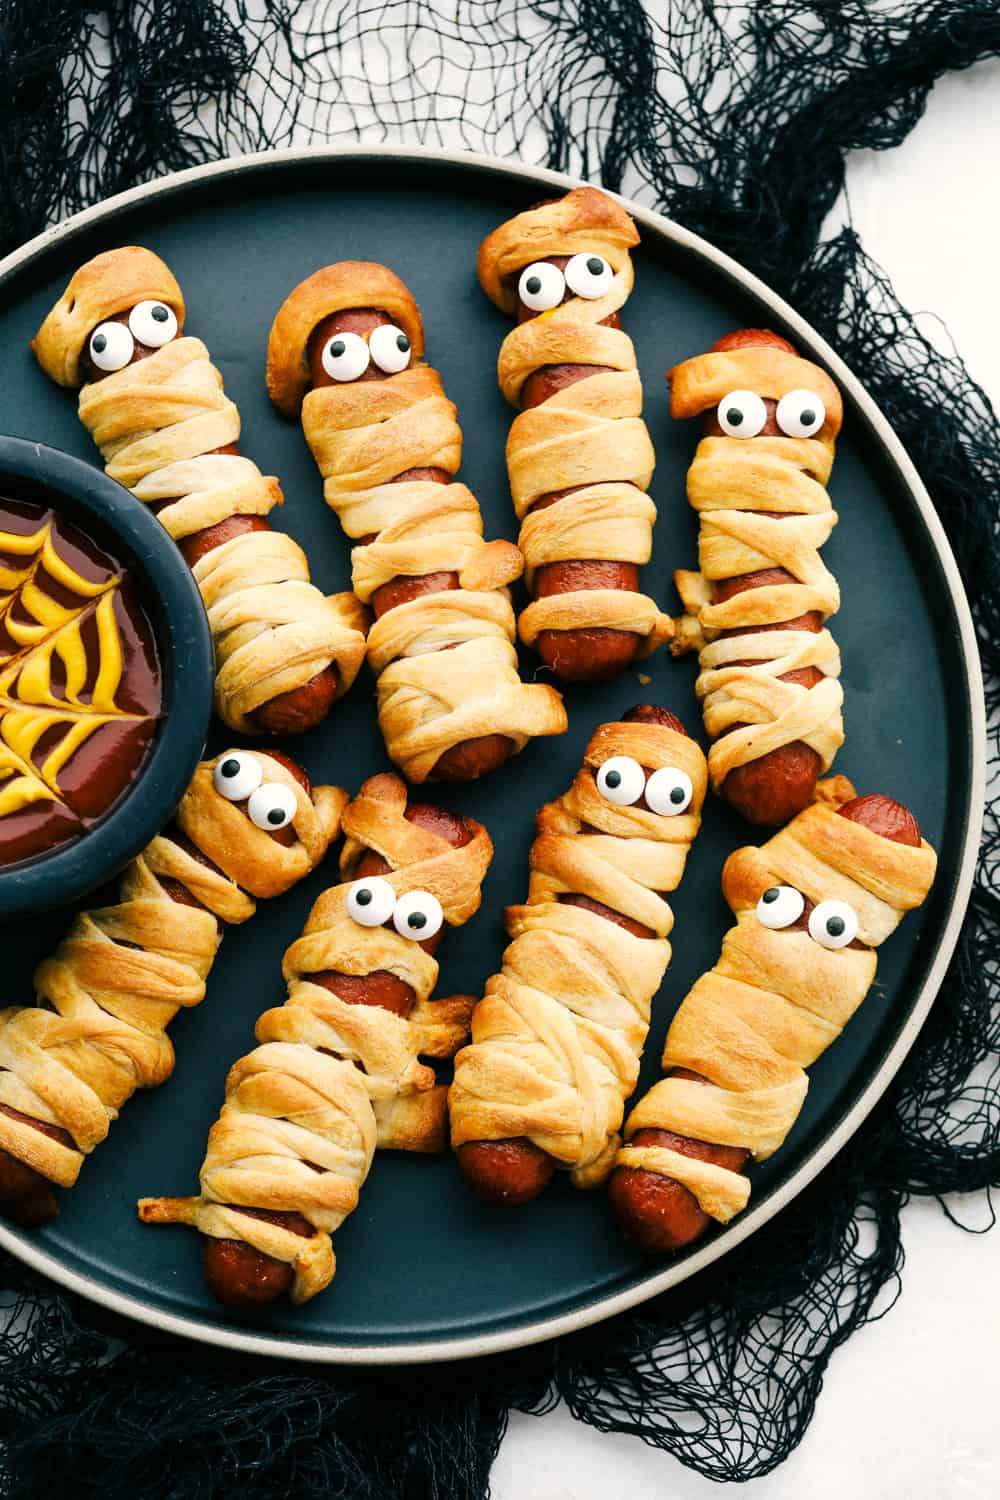 Mummy Hot dogs on a plate with spider webb dip.